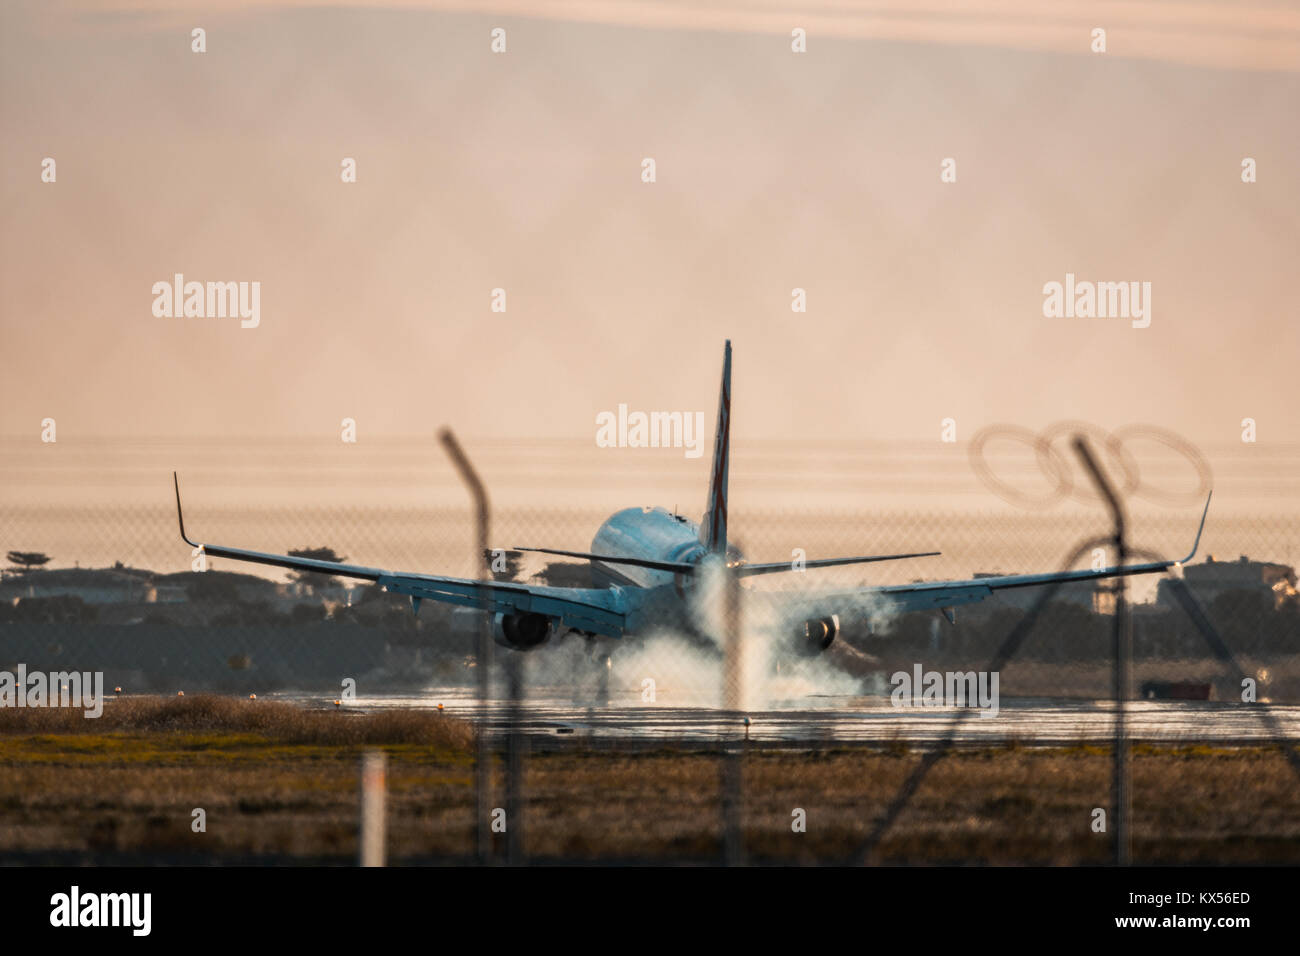 Plane Touching down on a runway Stock Photo